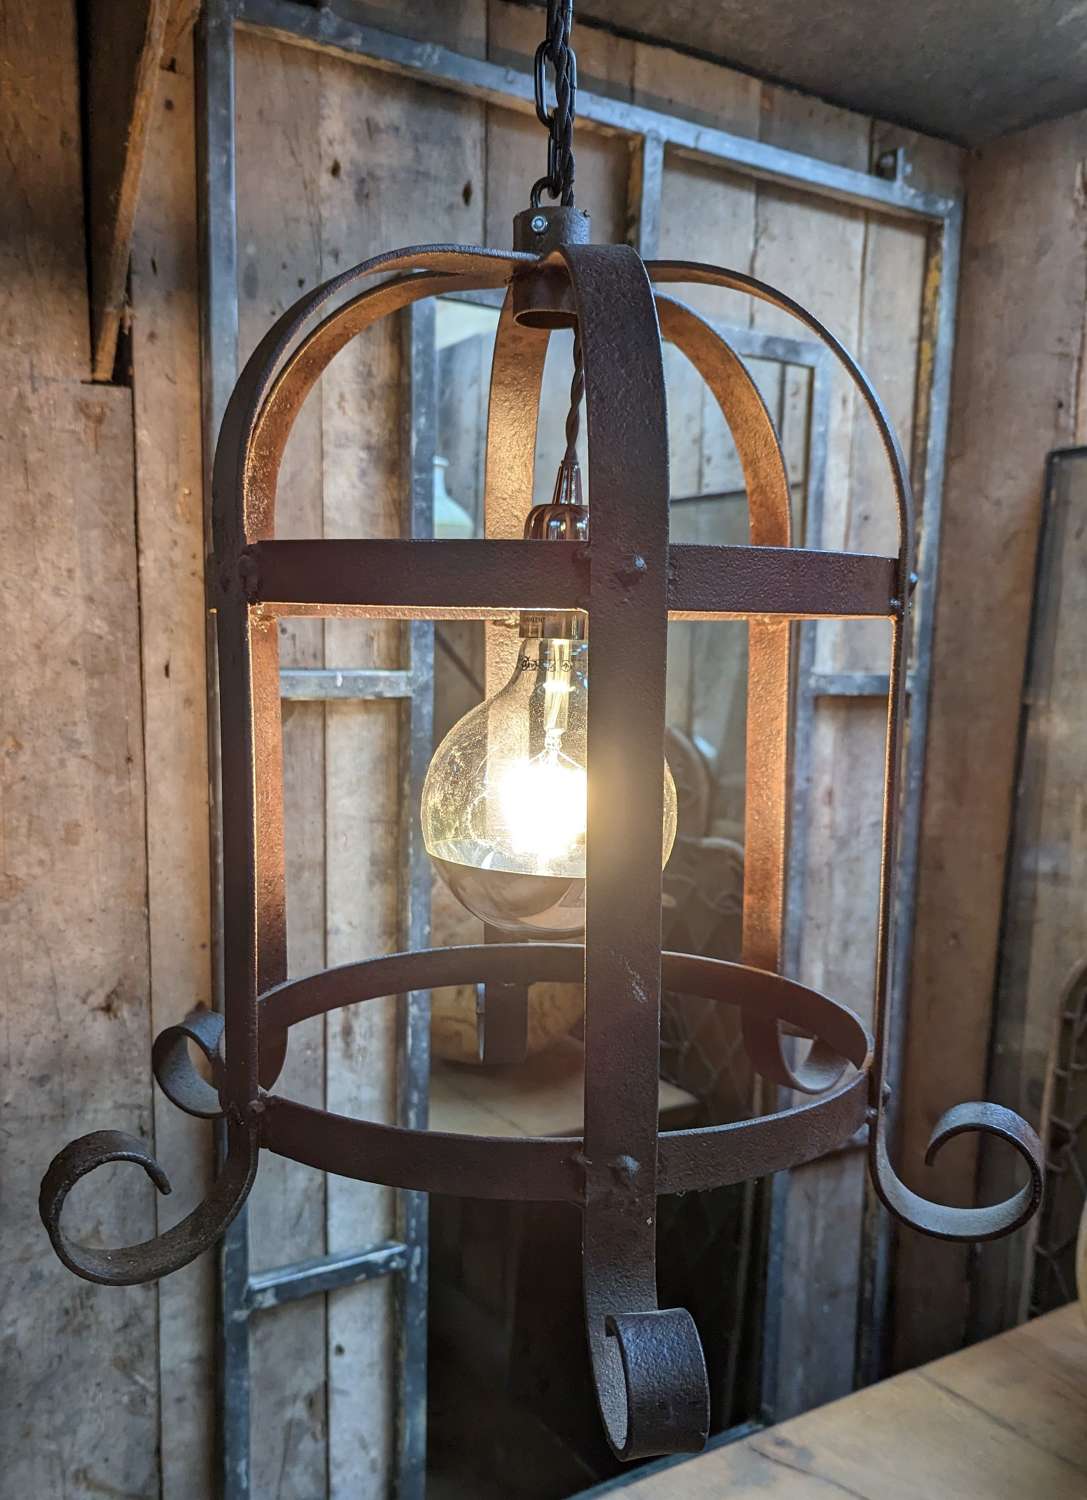 M1807 AN INDUSTRIAL STYLE HANGING LIGHT UPCYCLED FROM AN IRON BRAZIER